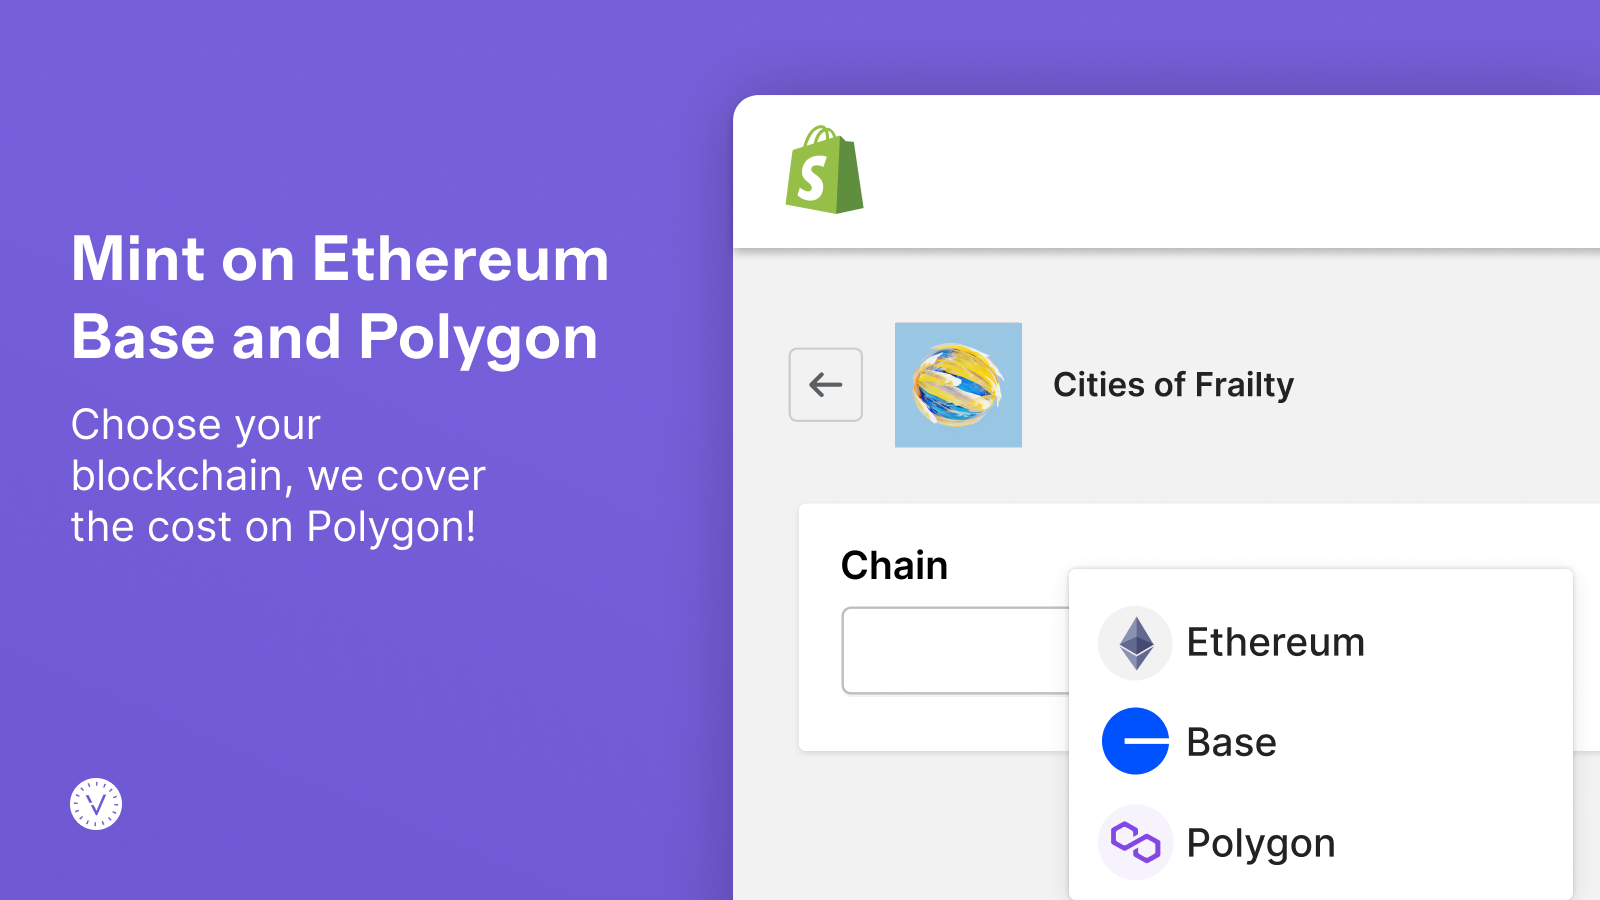 Mint on Ethereum, Base or Polygon